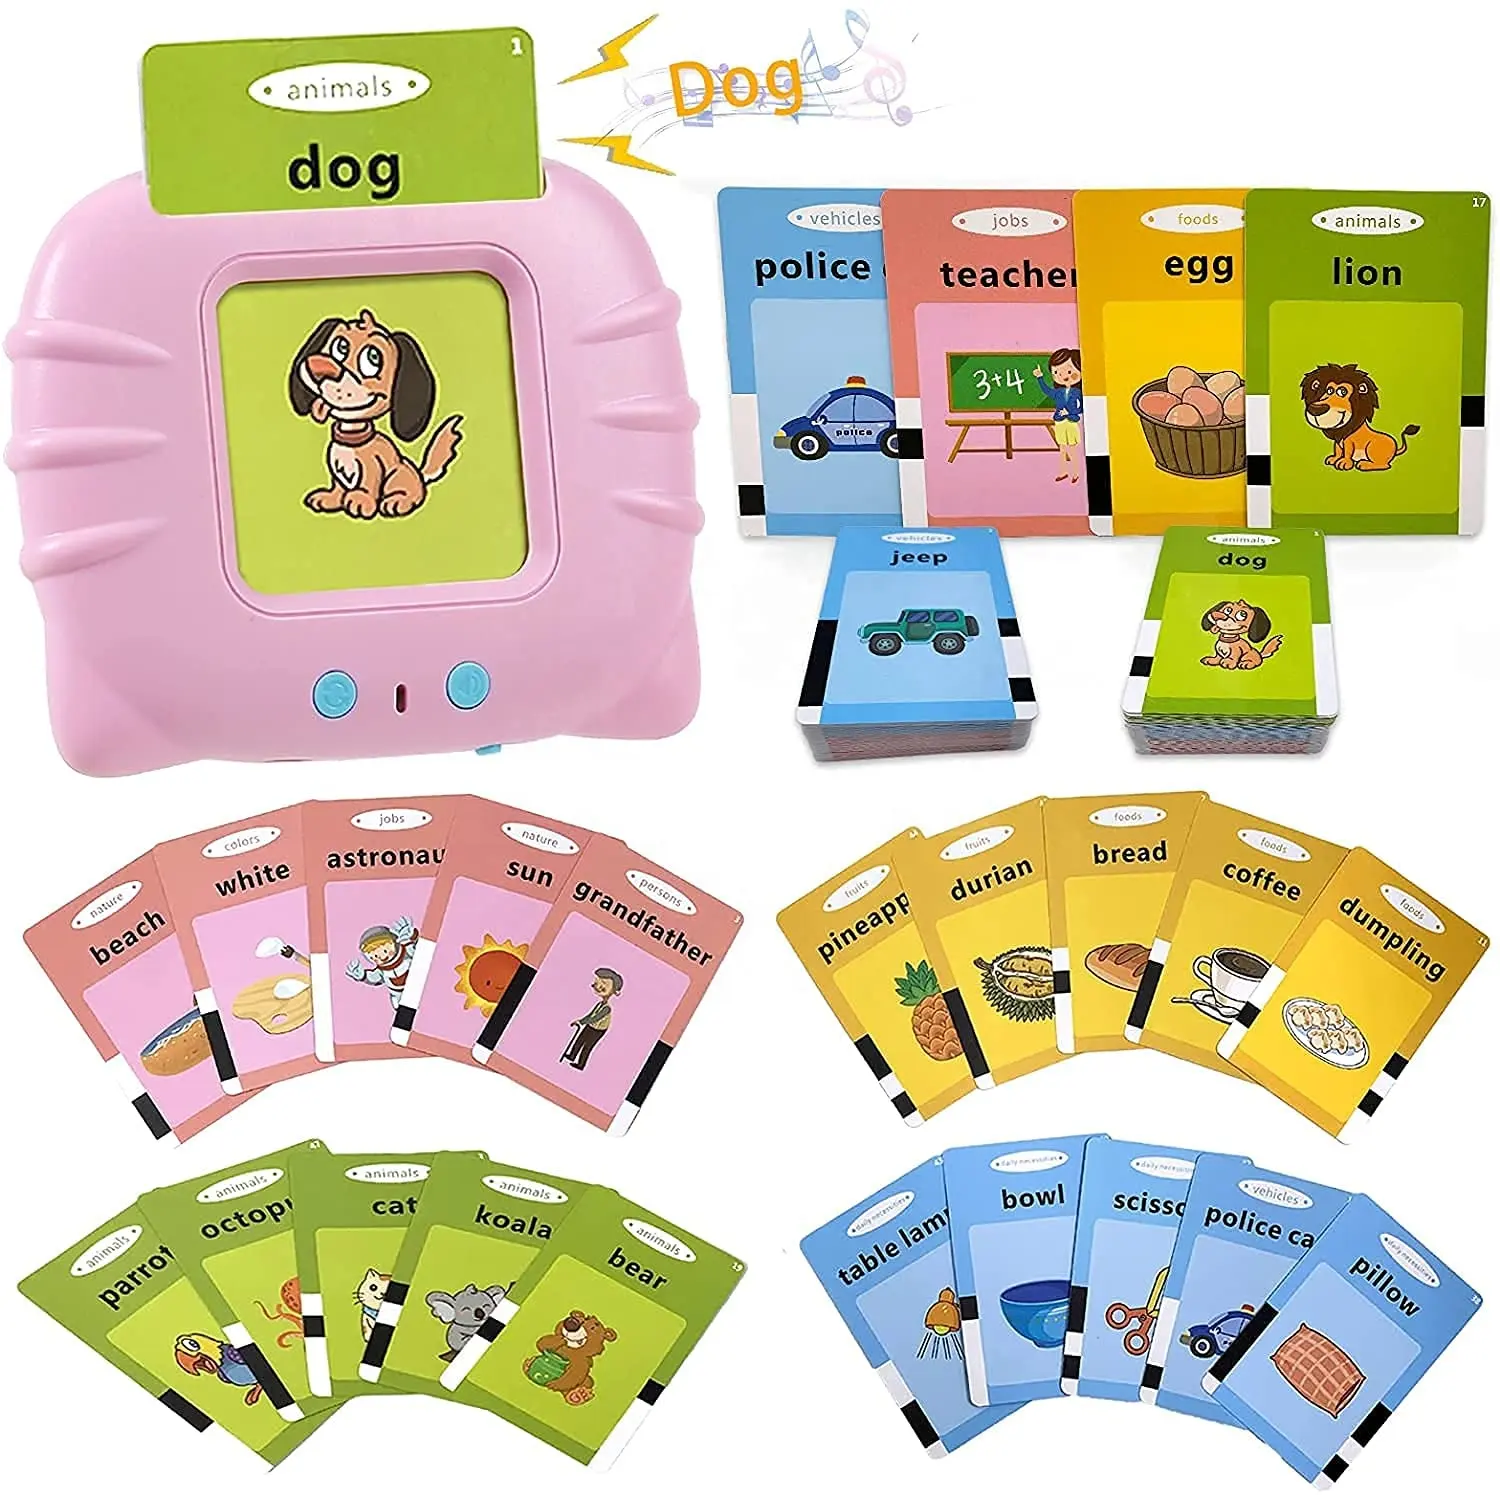 112 Pcs Sight Words Flash Cards Electronic Kids Early Educational Language Learning Device Toys With Reading Sound Effects